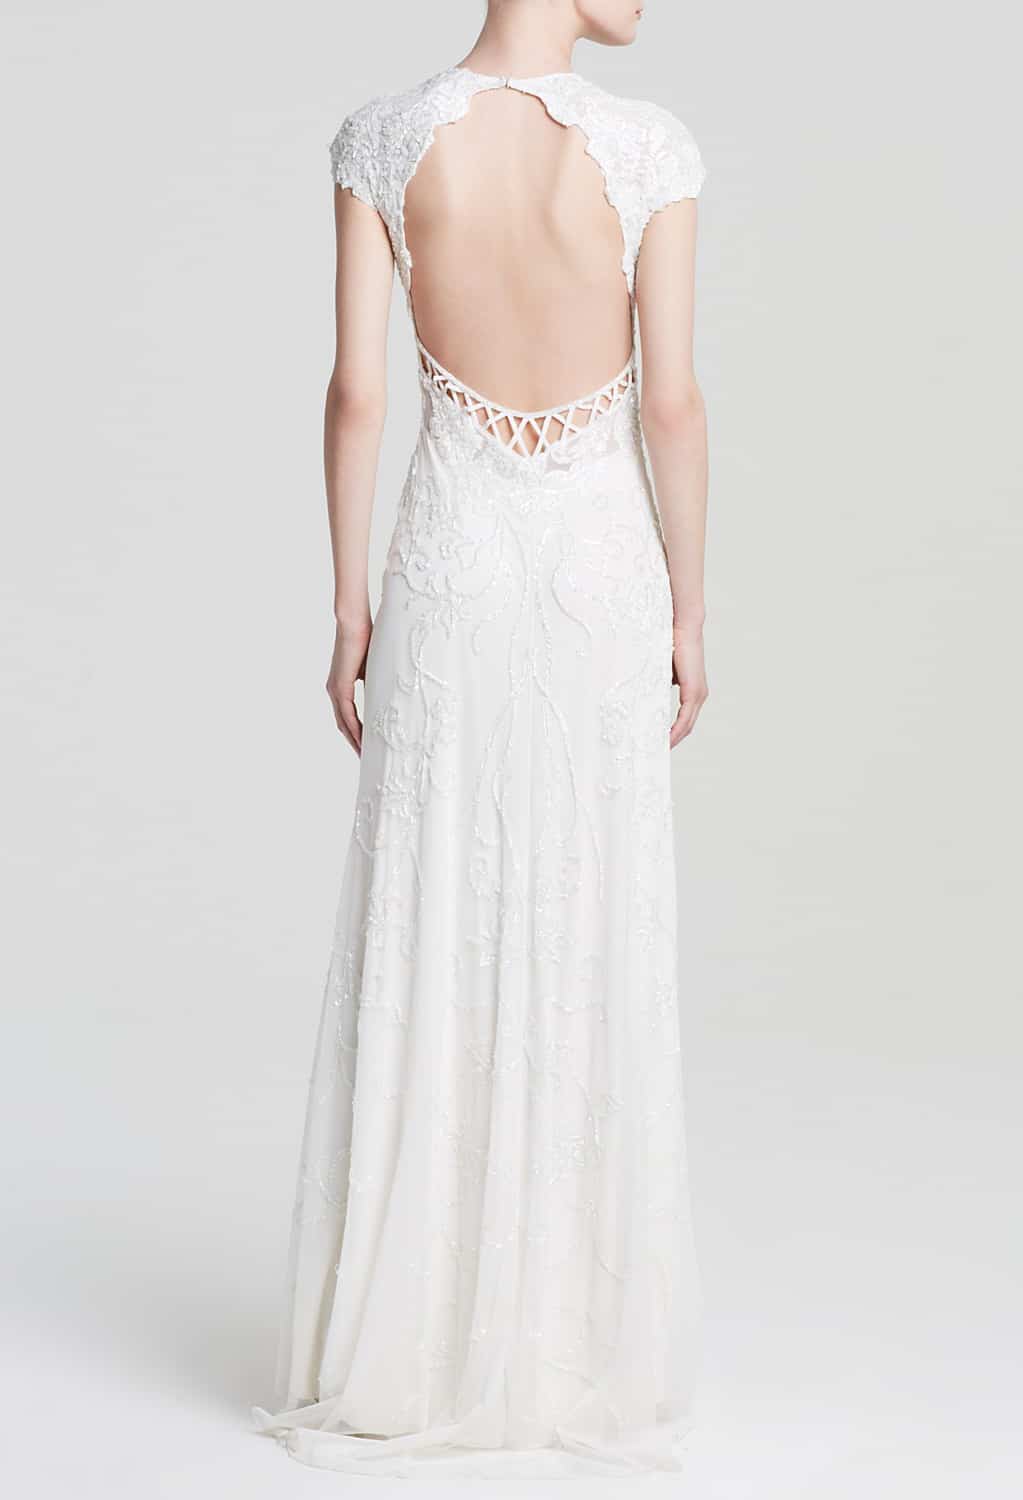 Top wedding dresses under $1000 - backless gown by Mac Duggal